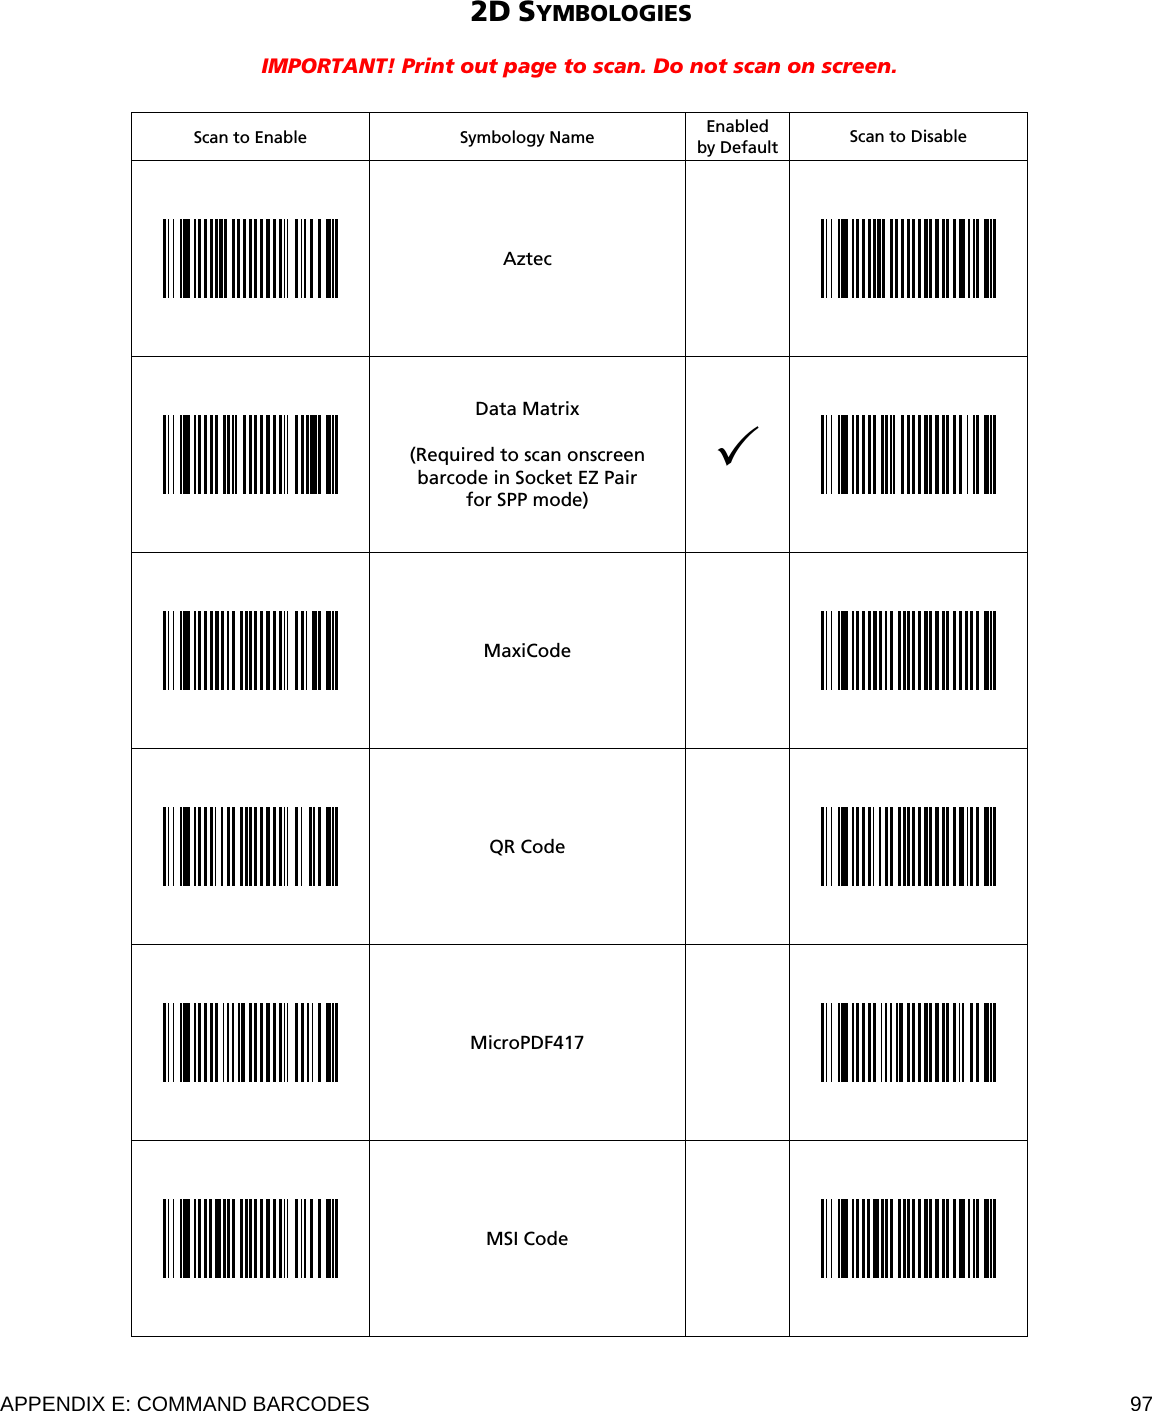  APPENDIX E: COMMAND BARCODES  97 2D SYMBOLOGIES  IMPORTANT! Print out page to scan. Do not scan on screen.    Scan to Enable  Symbology Name Enabled by Default  Scan to Disable  Aztec     Data Matrix  (Required to scan onscreen barcode in Socket EZ Pair  for SPP mode)    MaxiCode     QR Code    MicroPDF417     MSI Code     